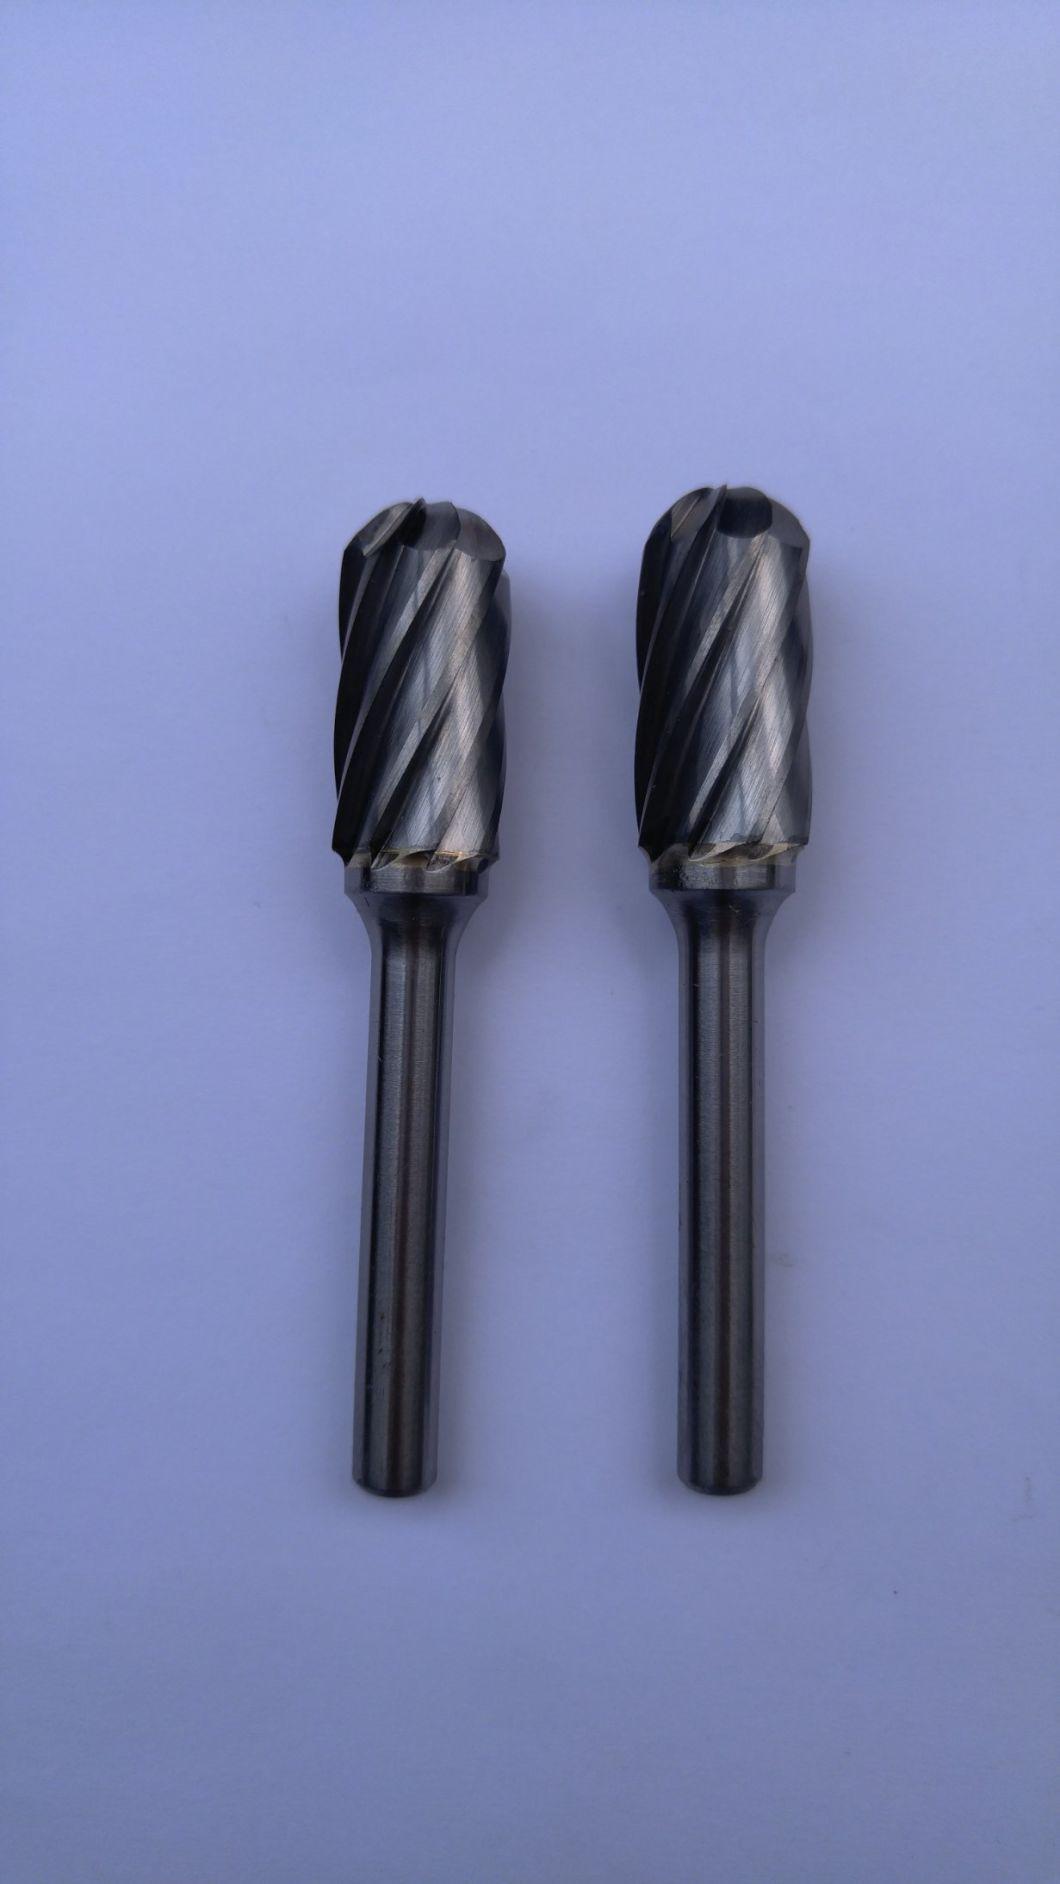 Full Range of Carbide Burrs with Excellent Endurance